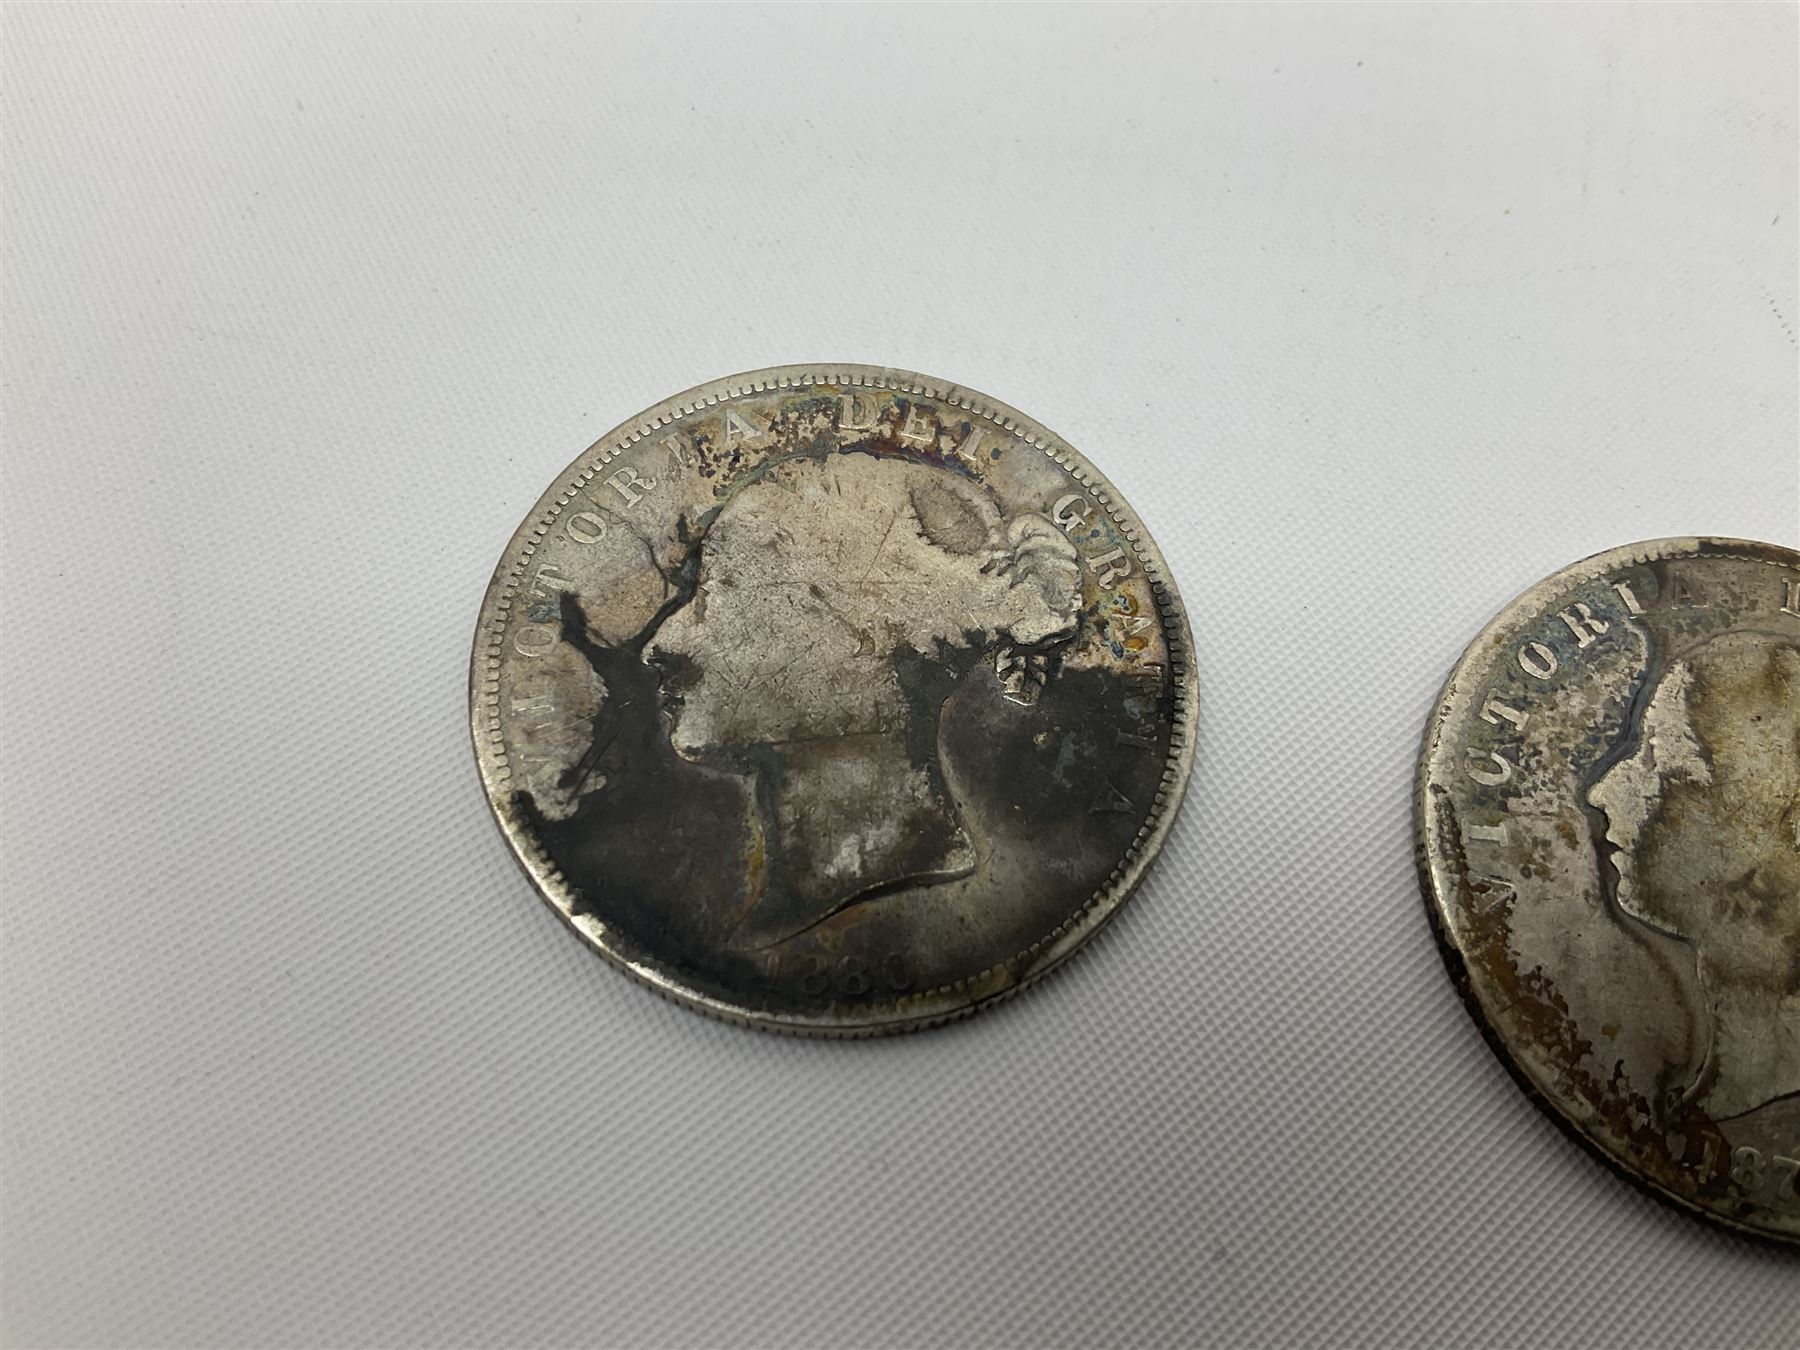 Queen Victoria 1875 and 1880 half crown coin - Image 4 of 7